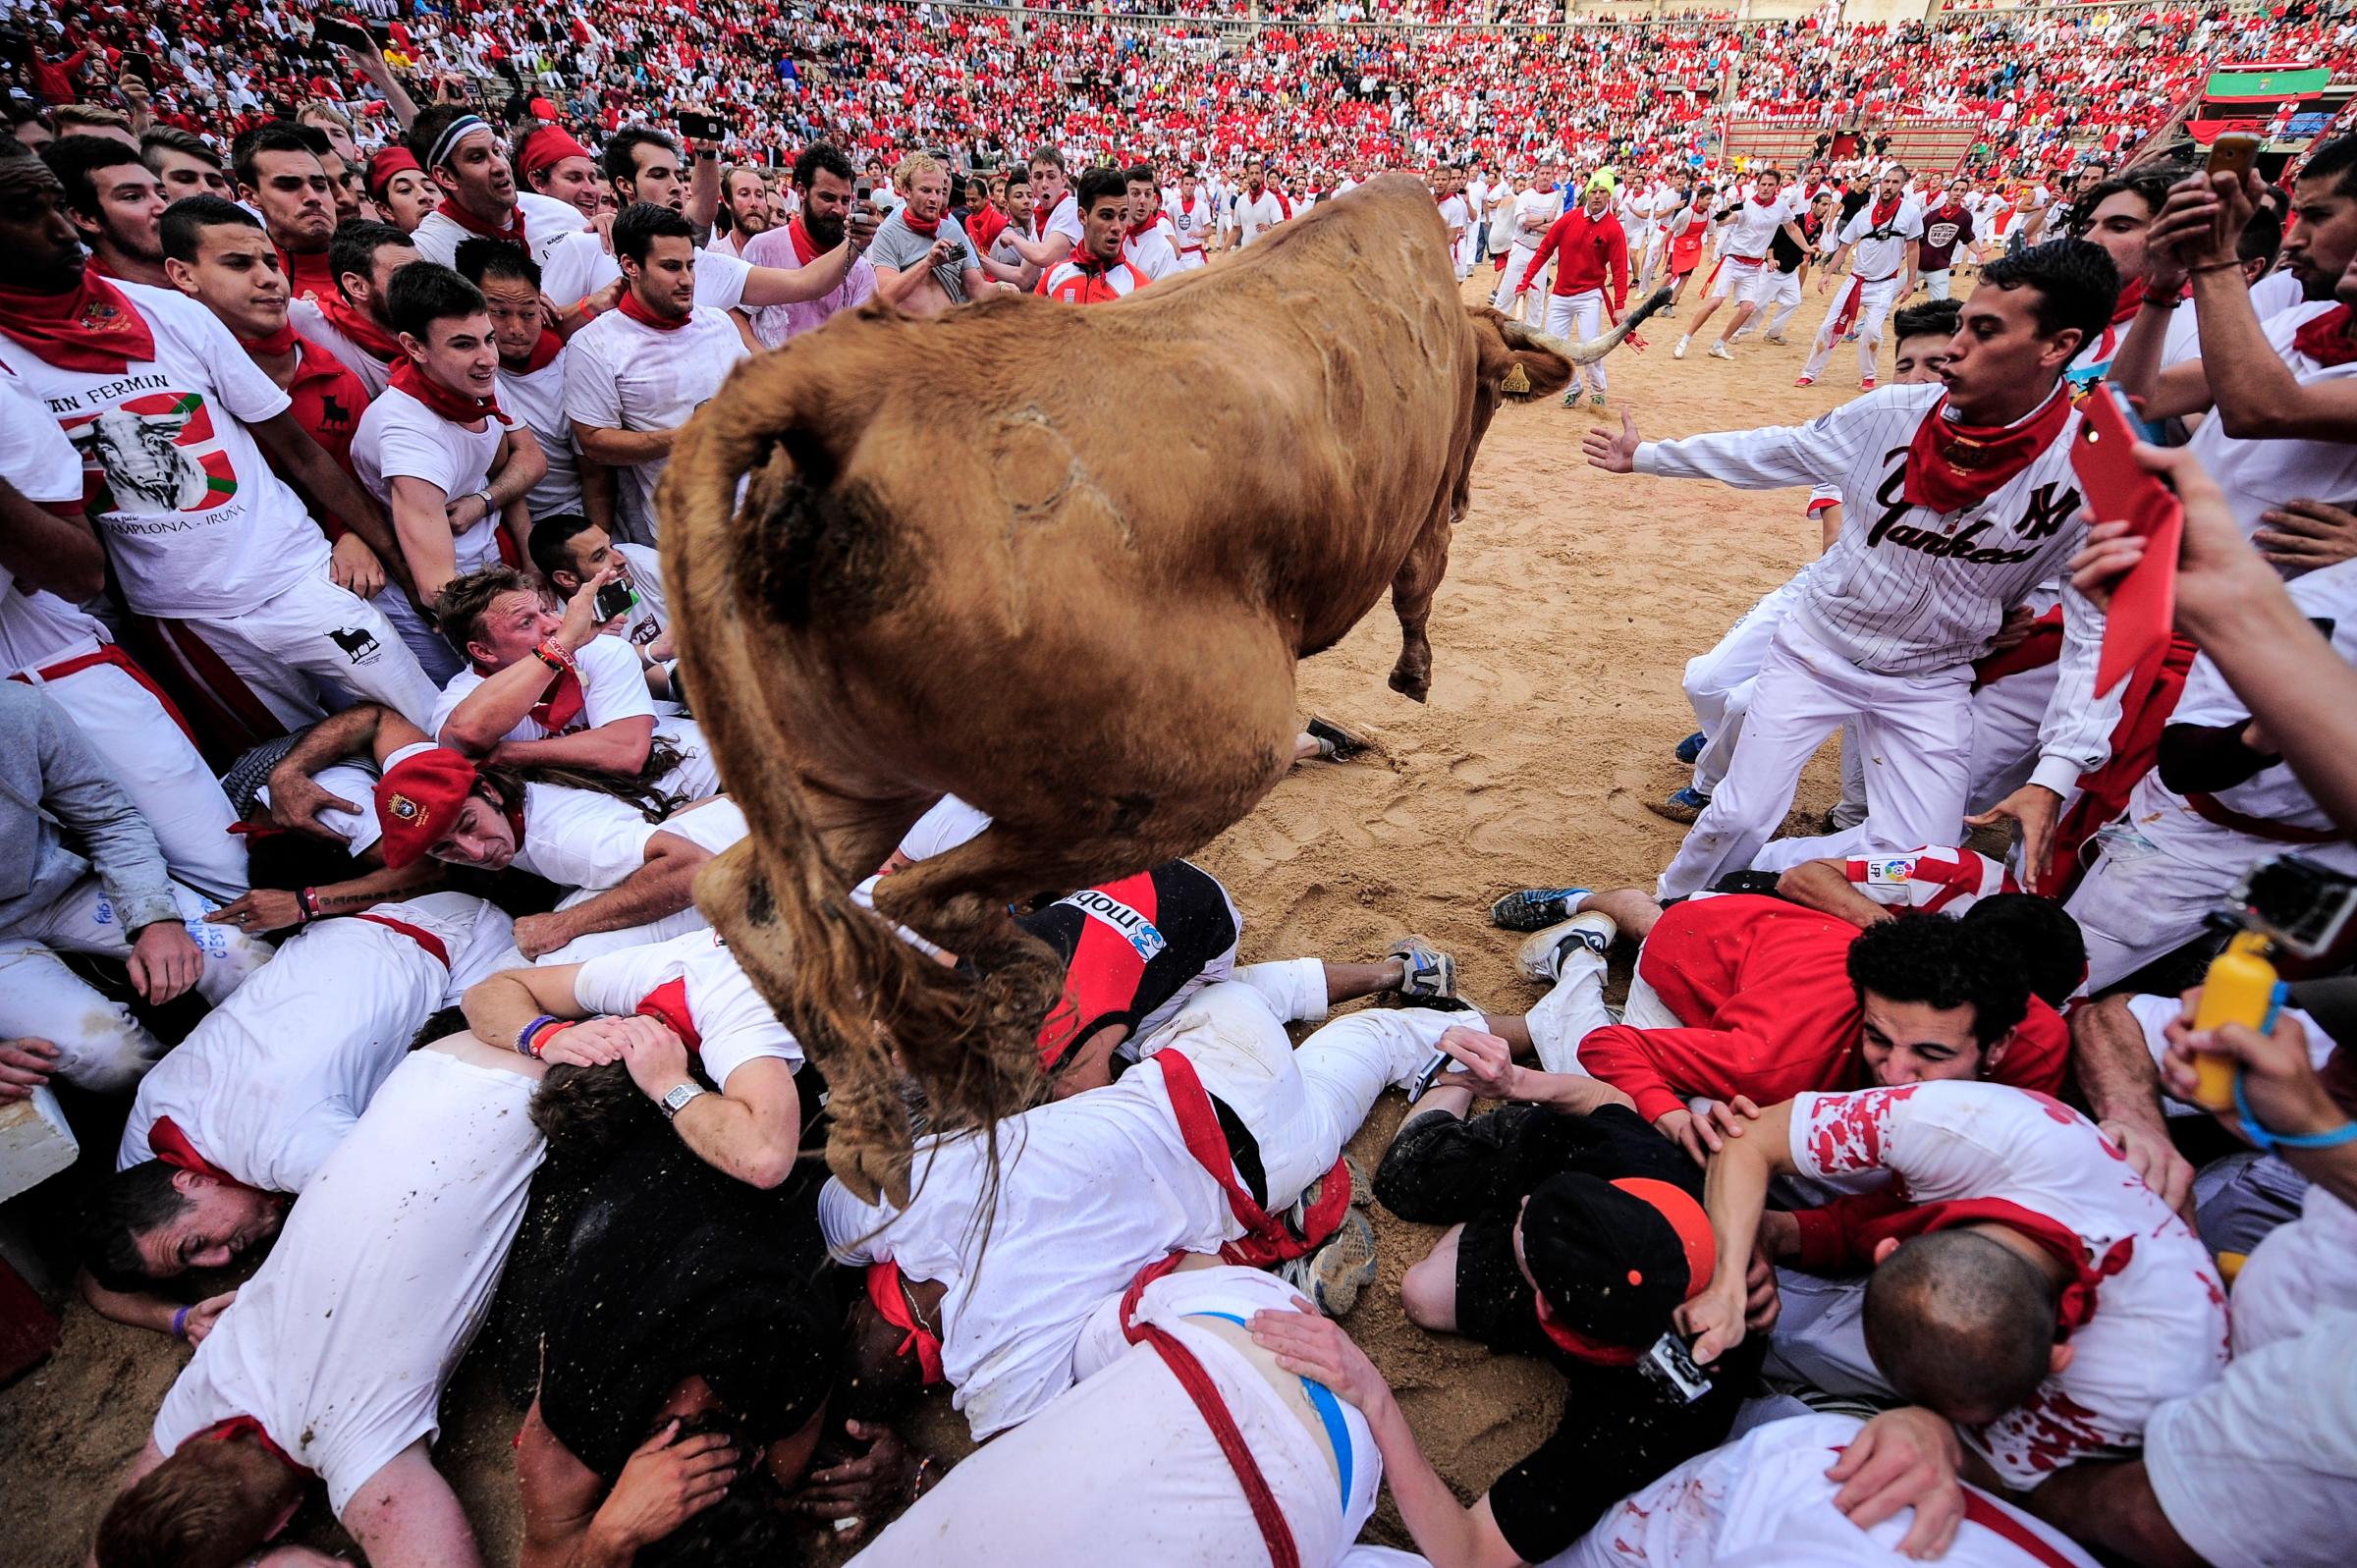 A cow jumps over revelers at the San Fermin festival, in Pamplona, Spain on July 8, 2014.